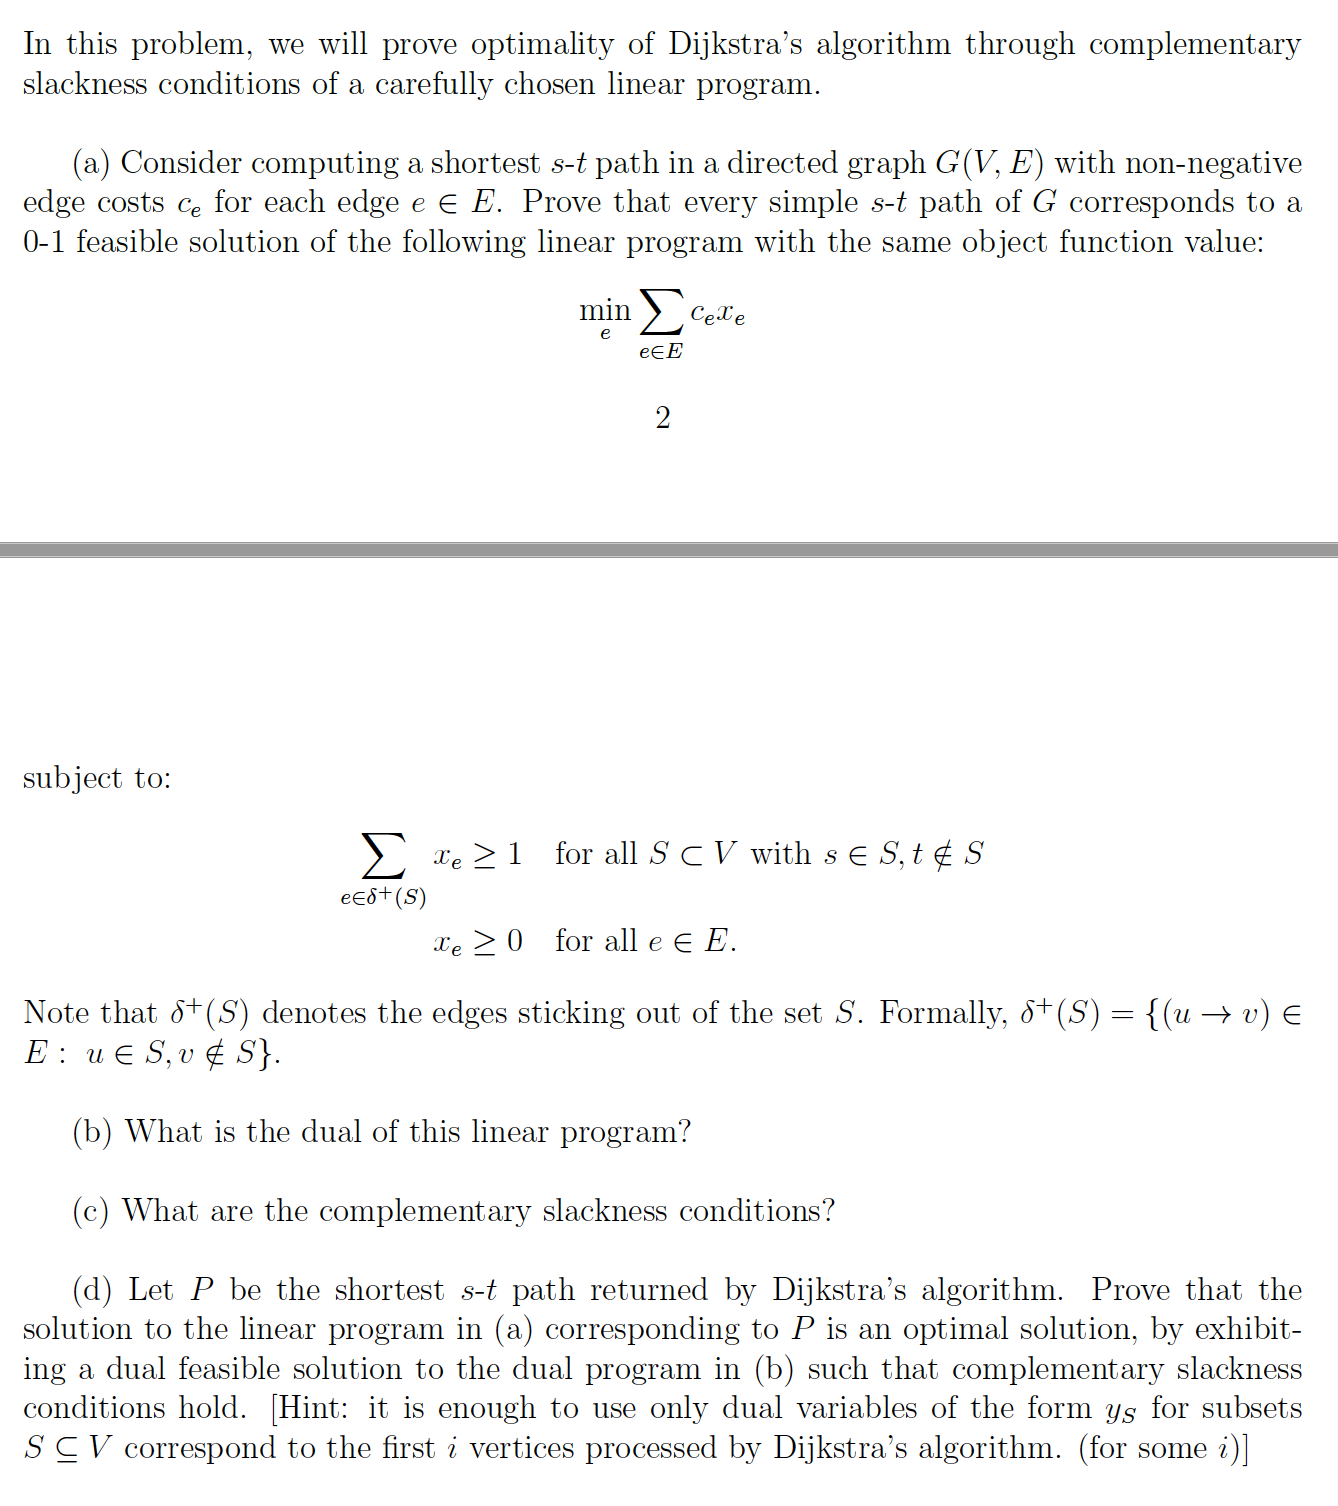 In this problem, we will prove optimality of Dijkstra's algorithm through complementary slackness conditions